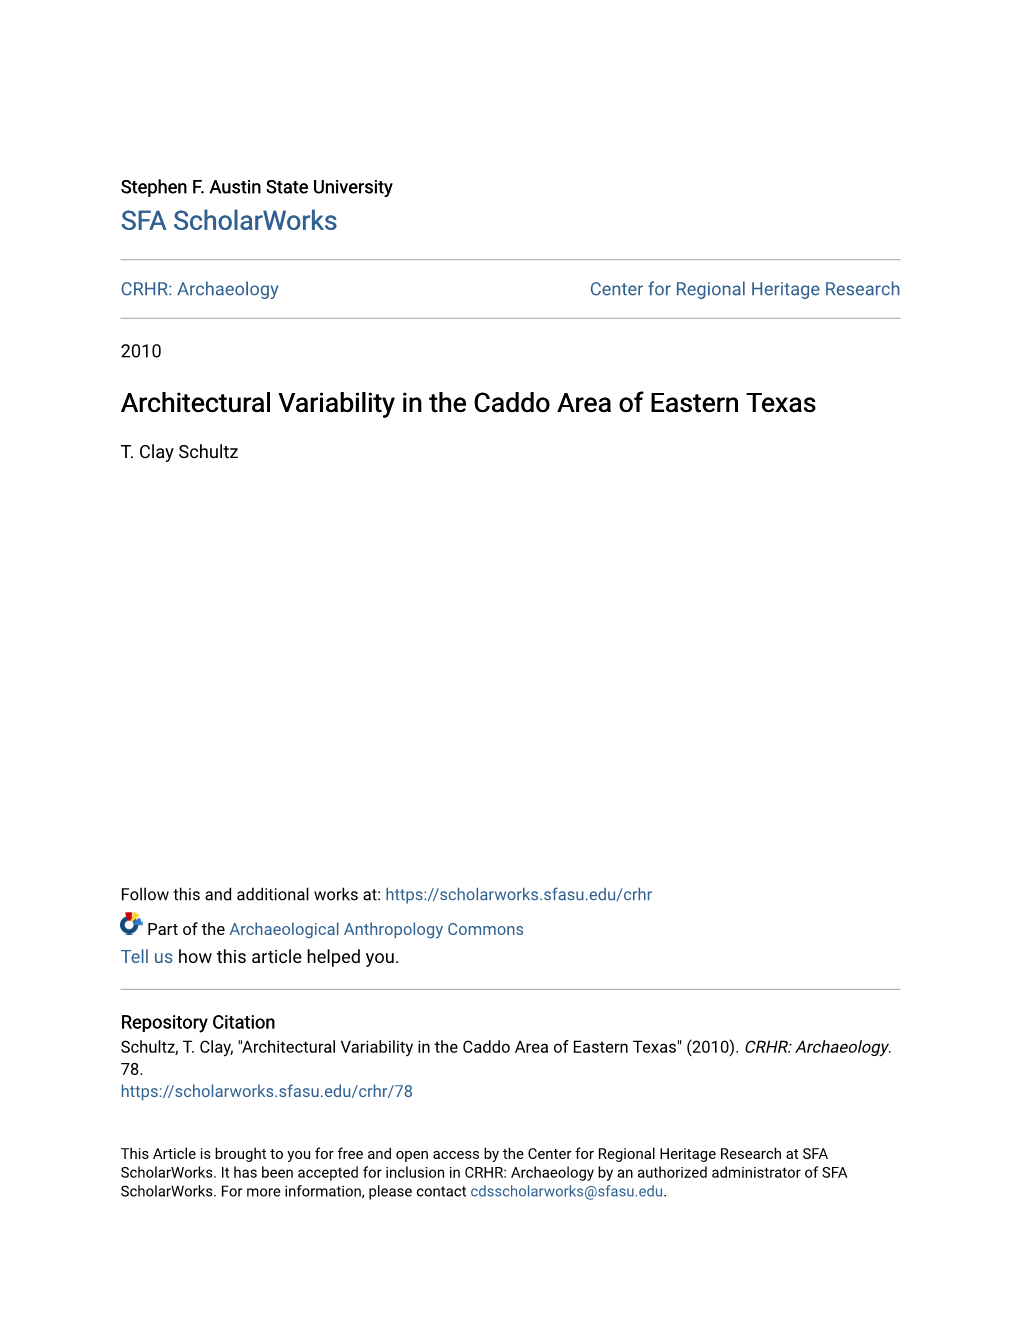 Architectural Variability in the Caddo Area of Eastern Texas